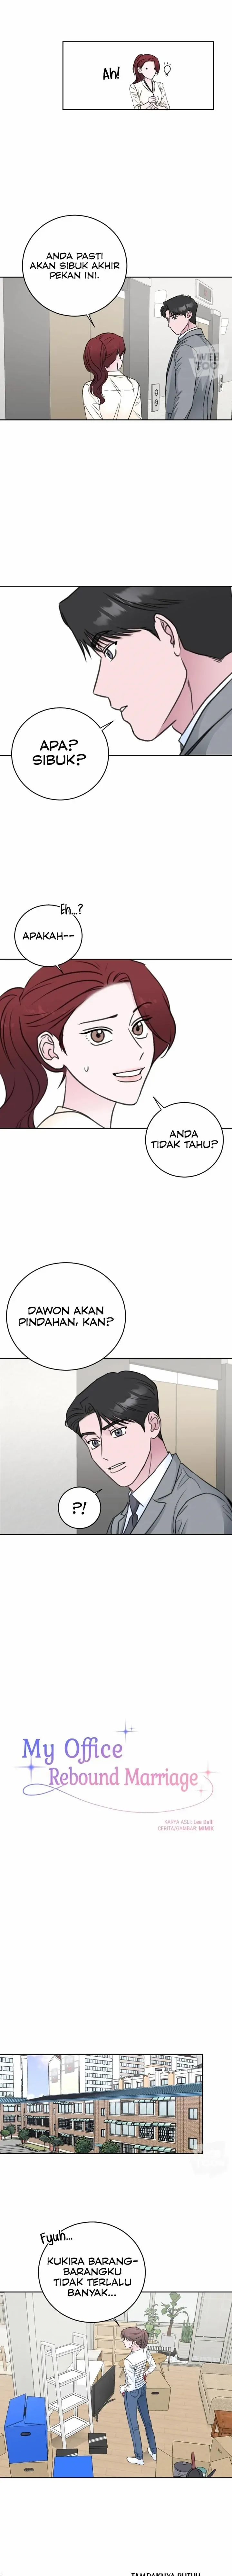 My Office Rebound Marriage - Page 3